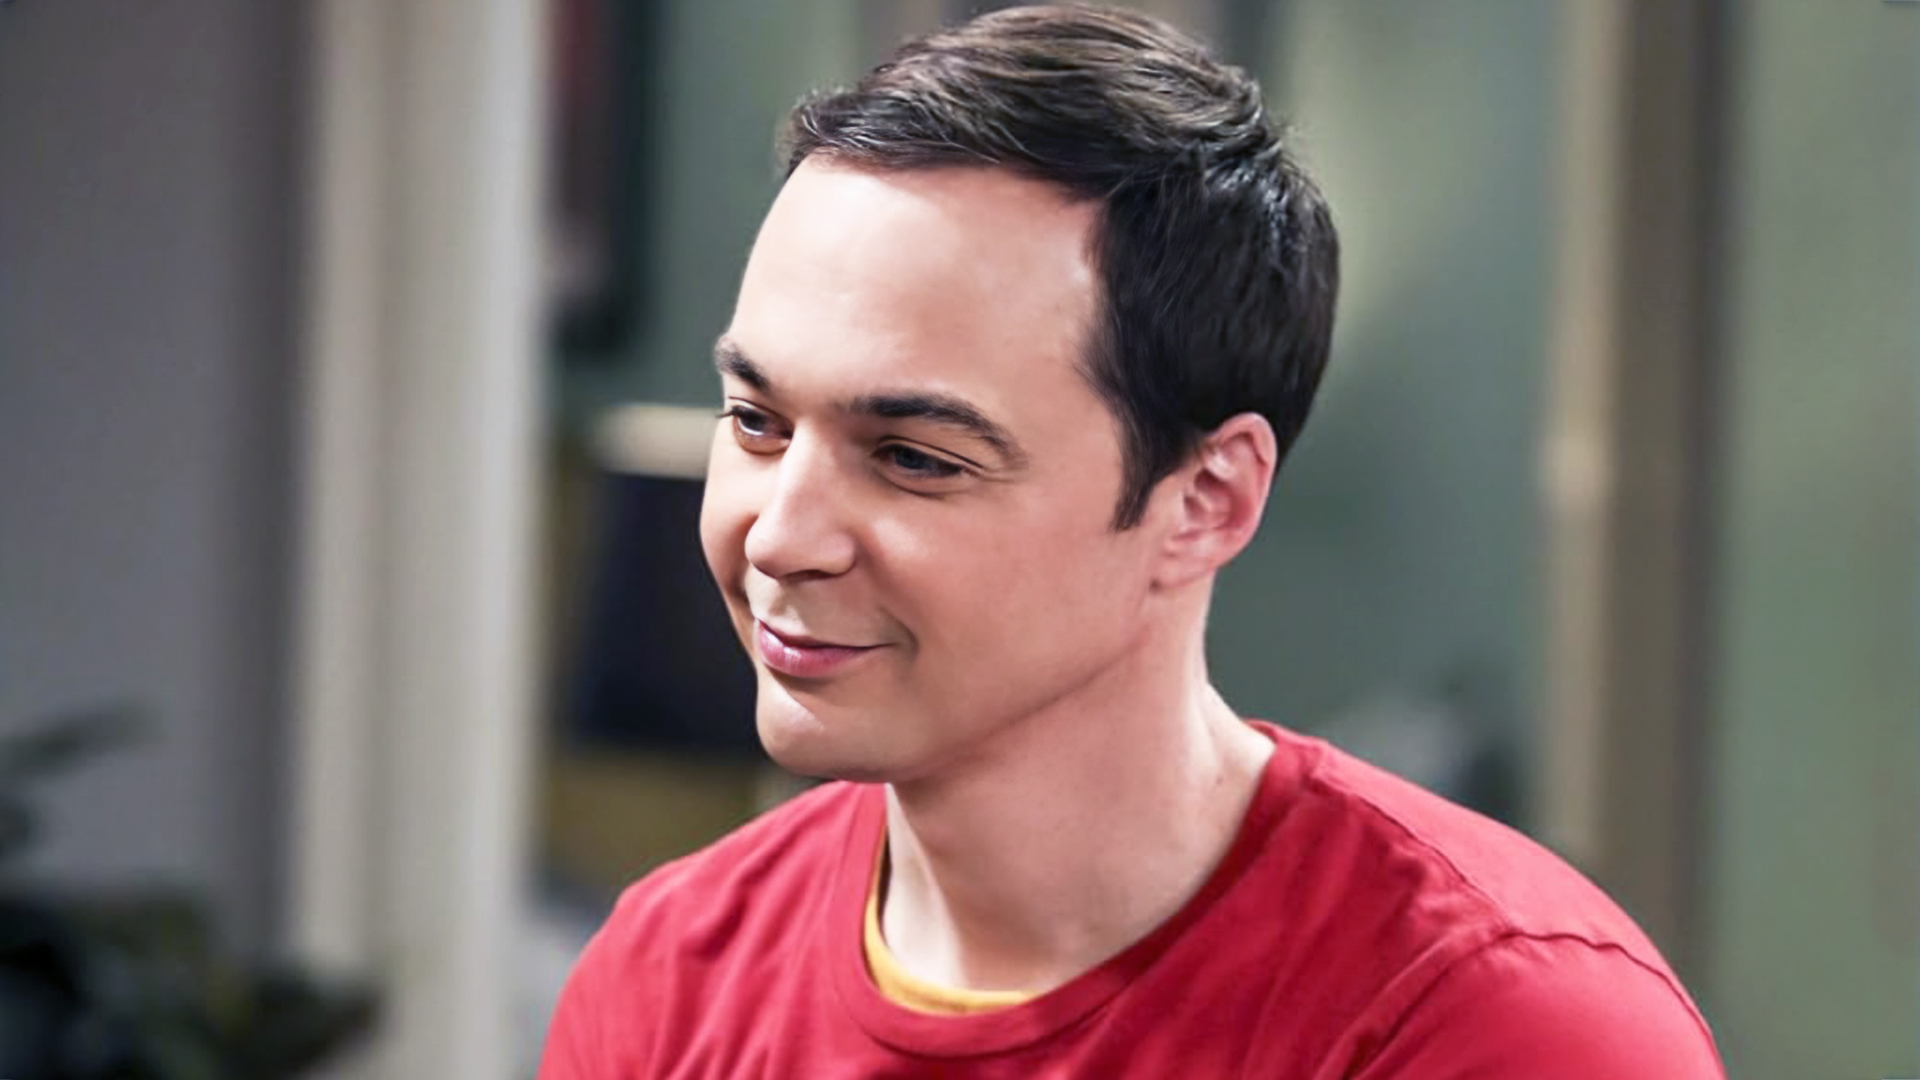 When Bernadette Became a Mom: Jim Parsons Shares Fun Behind-the-Scenes Moments from 'The Big Bang Theory' Season 11